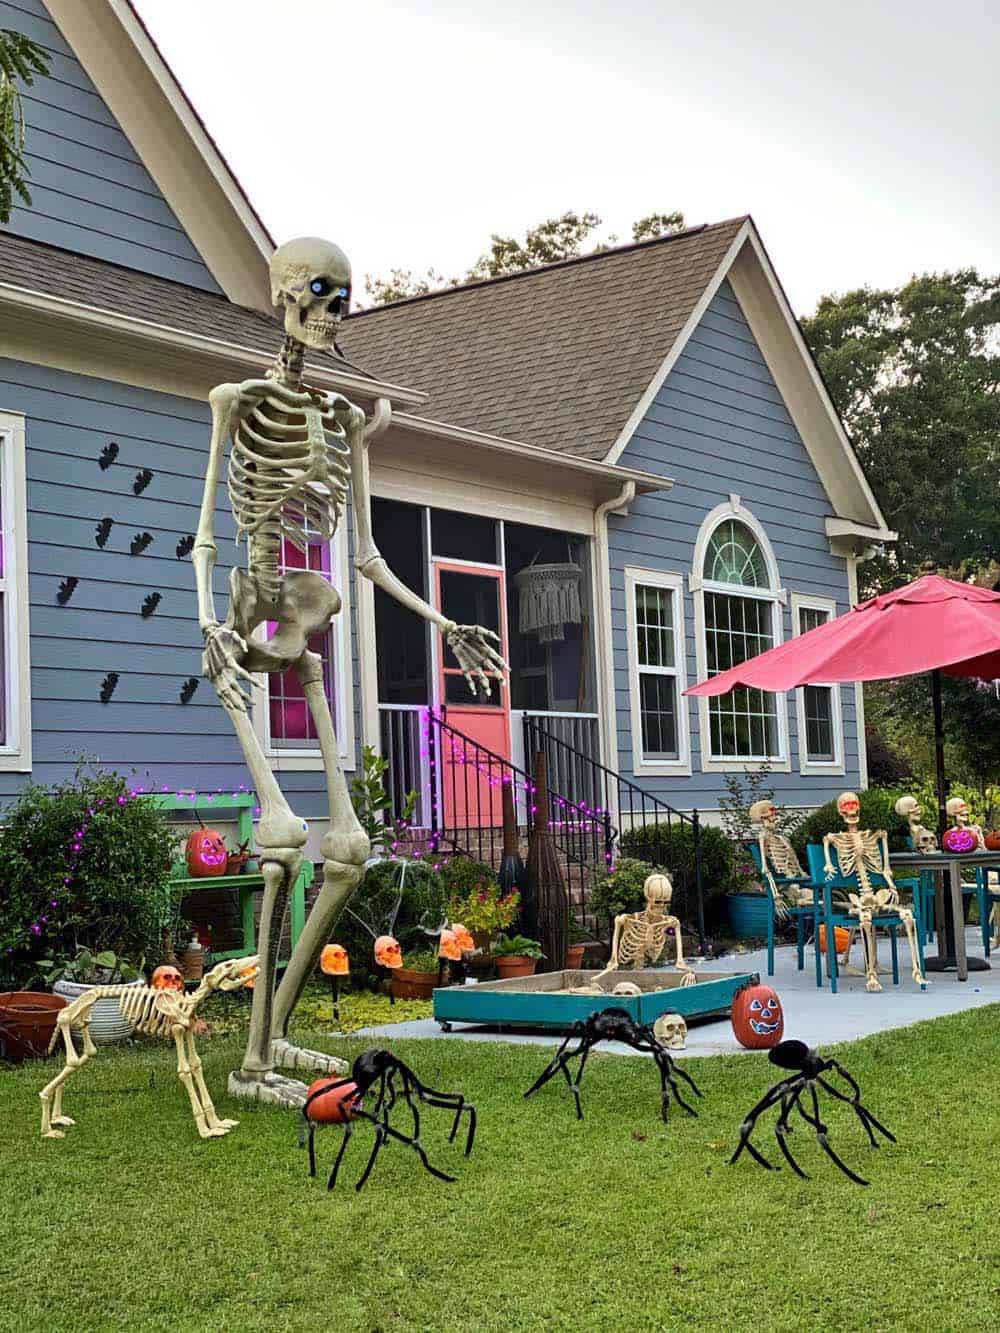 Halloween decorated yard with zombies and skeletons